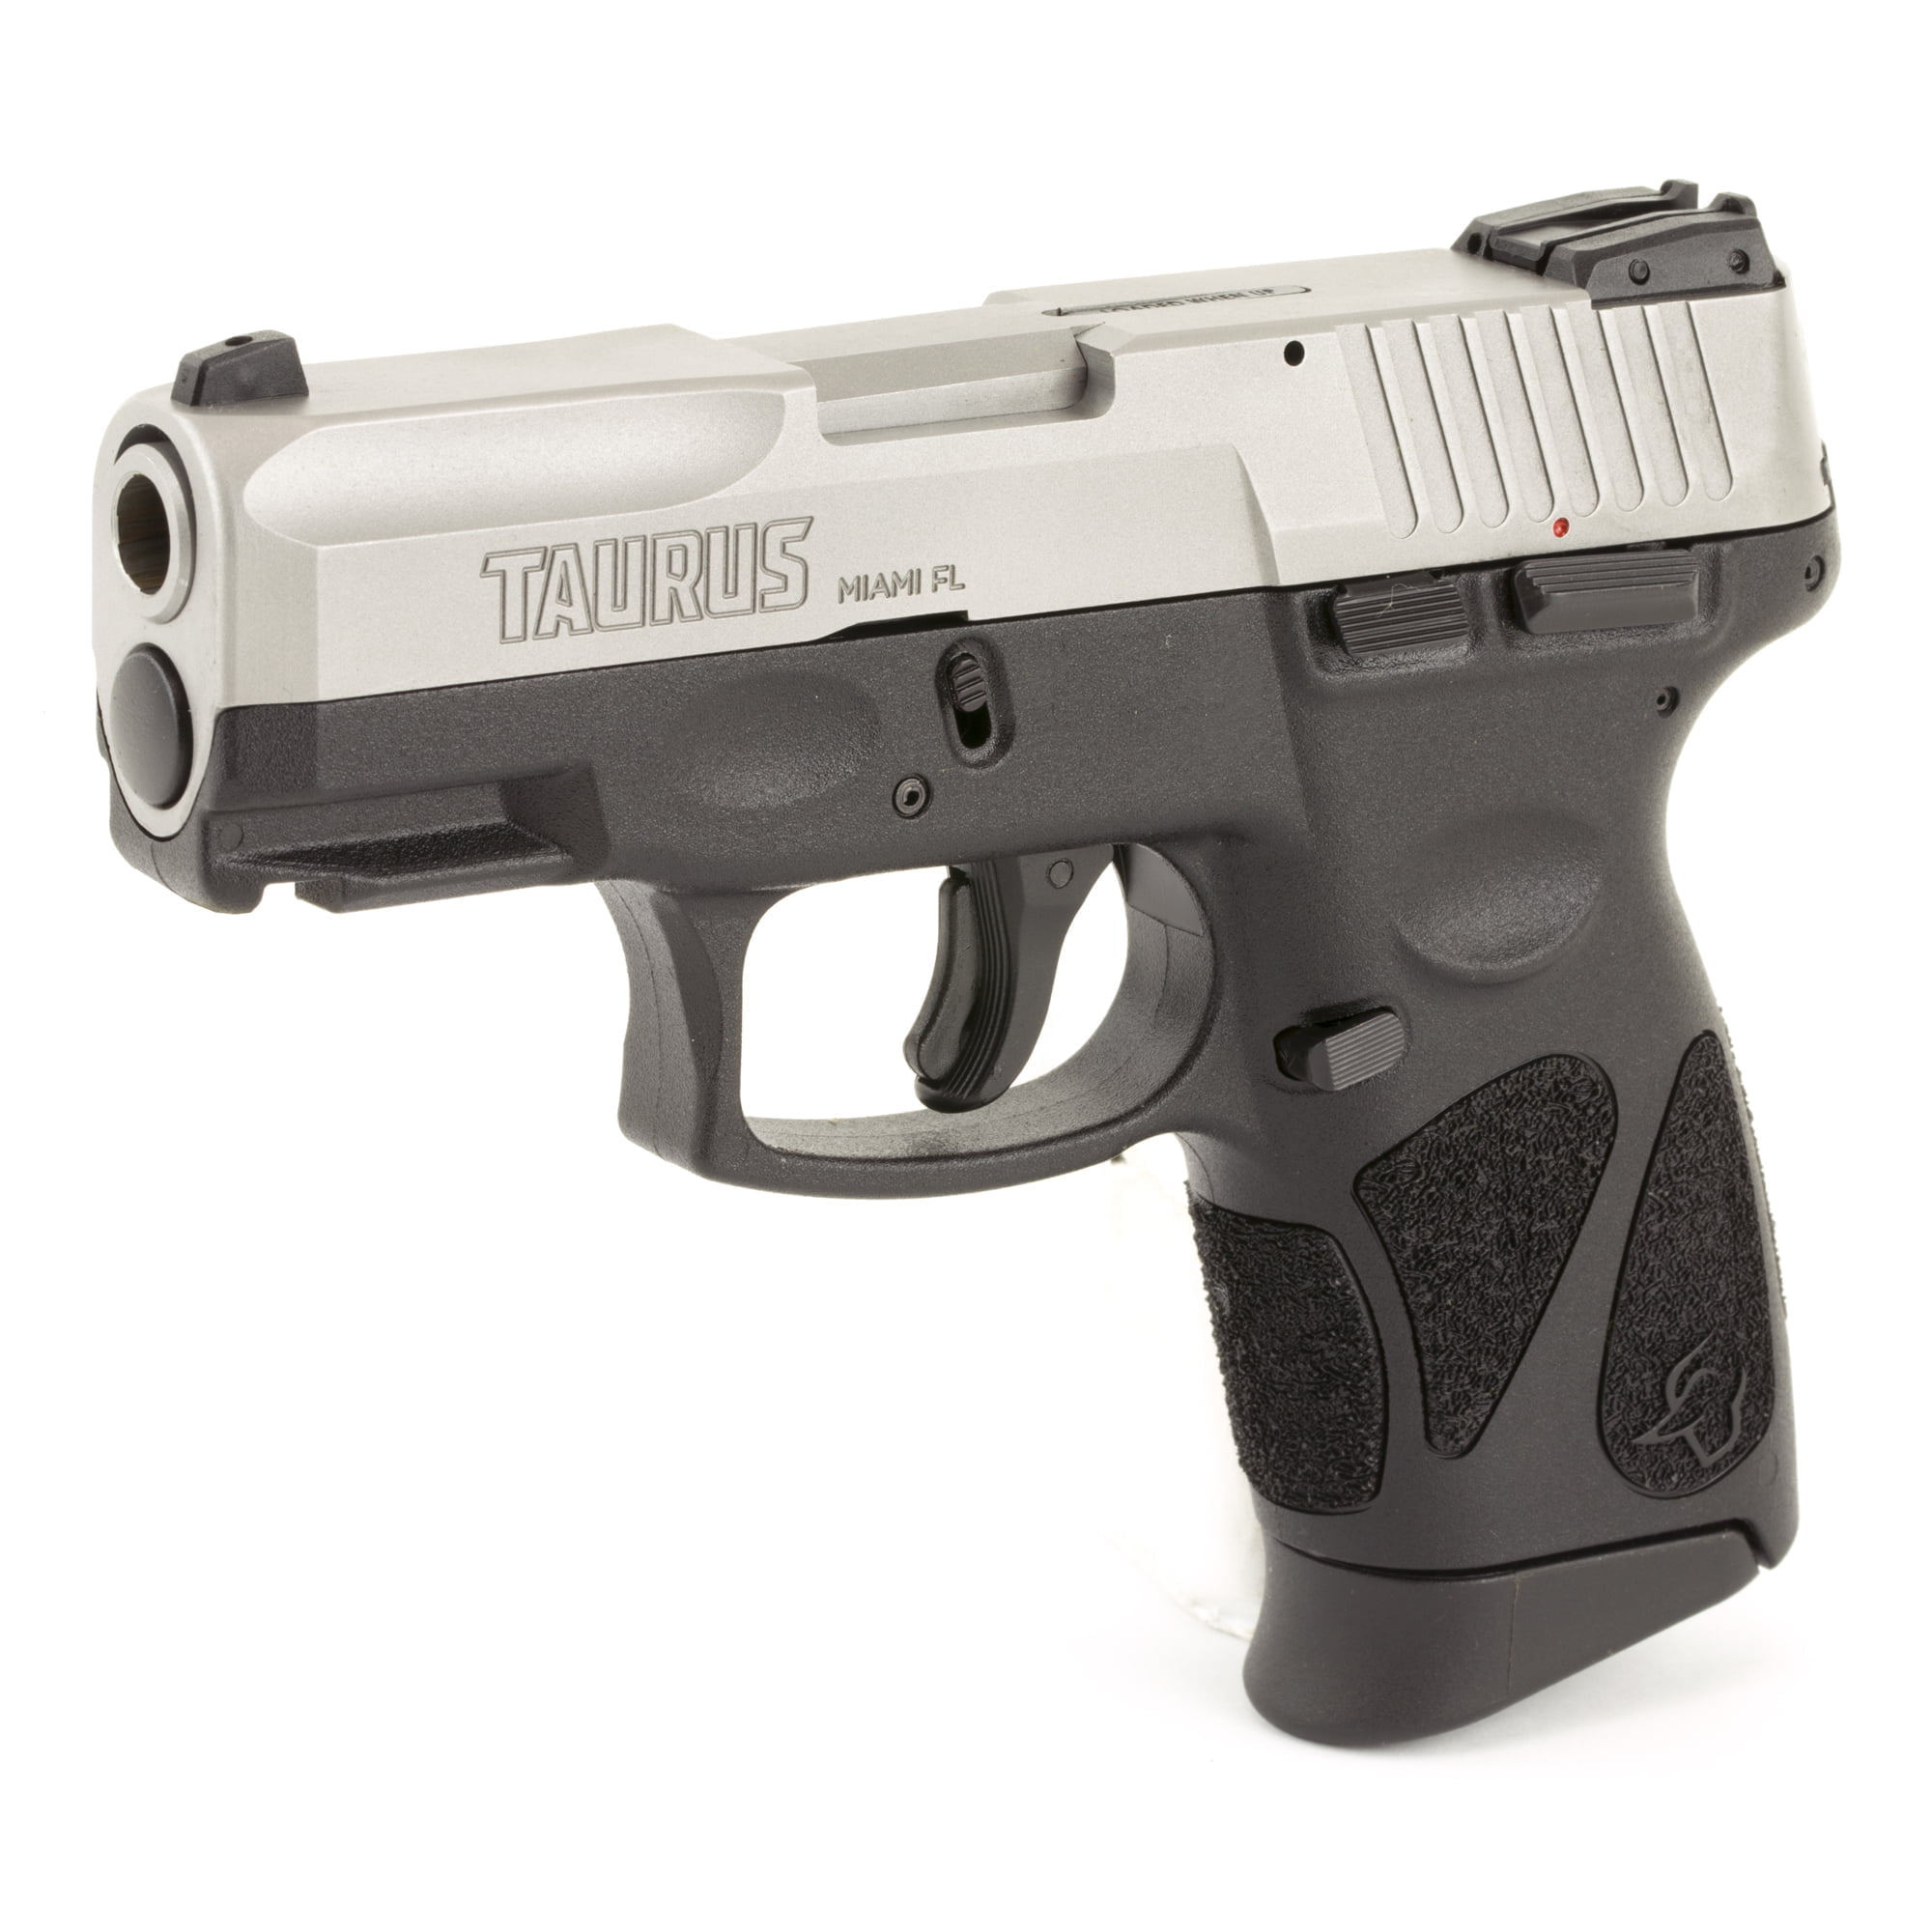 taurus-g2c-a-great-low-budget-pistol-and-a-ccw-legend